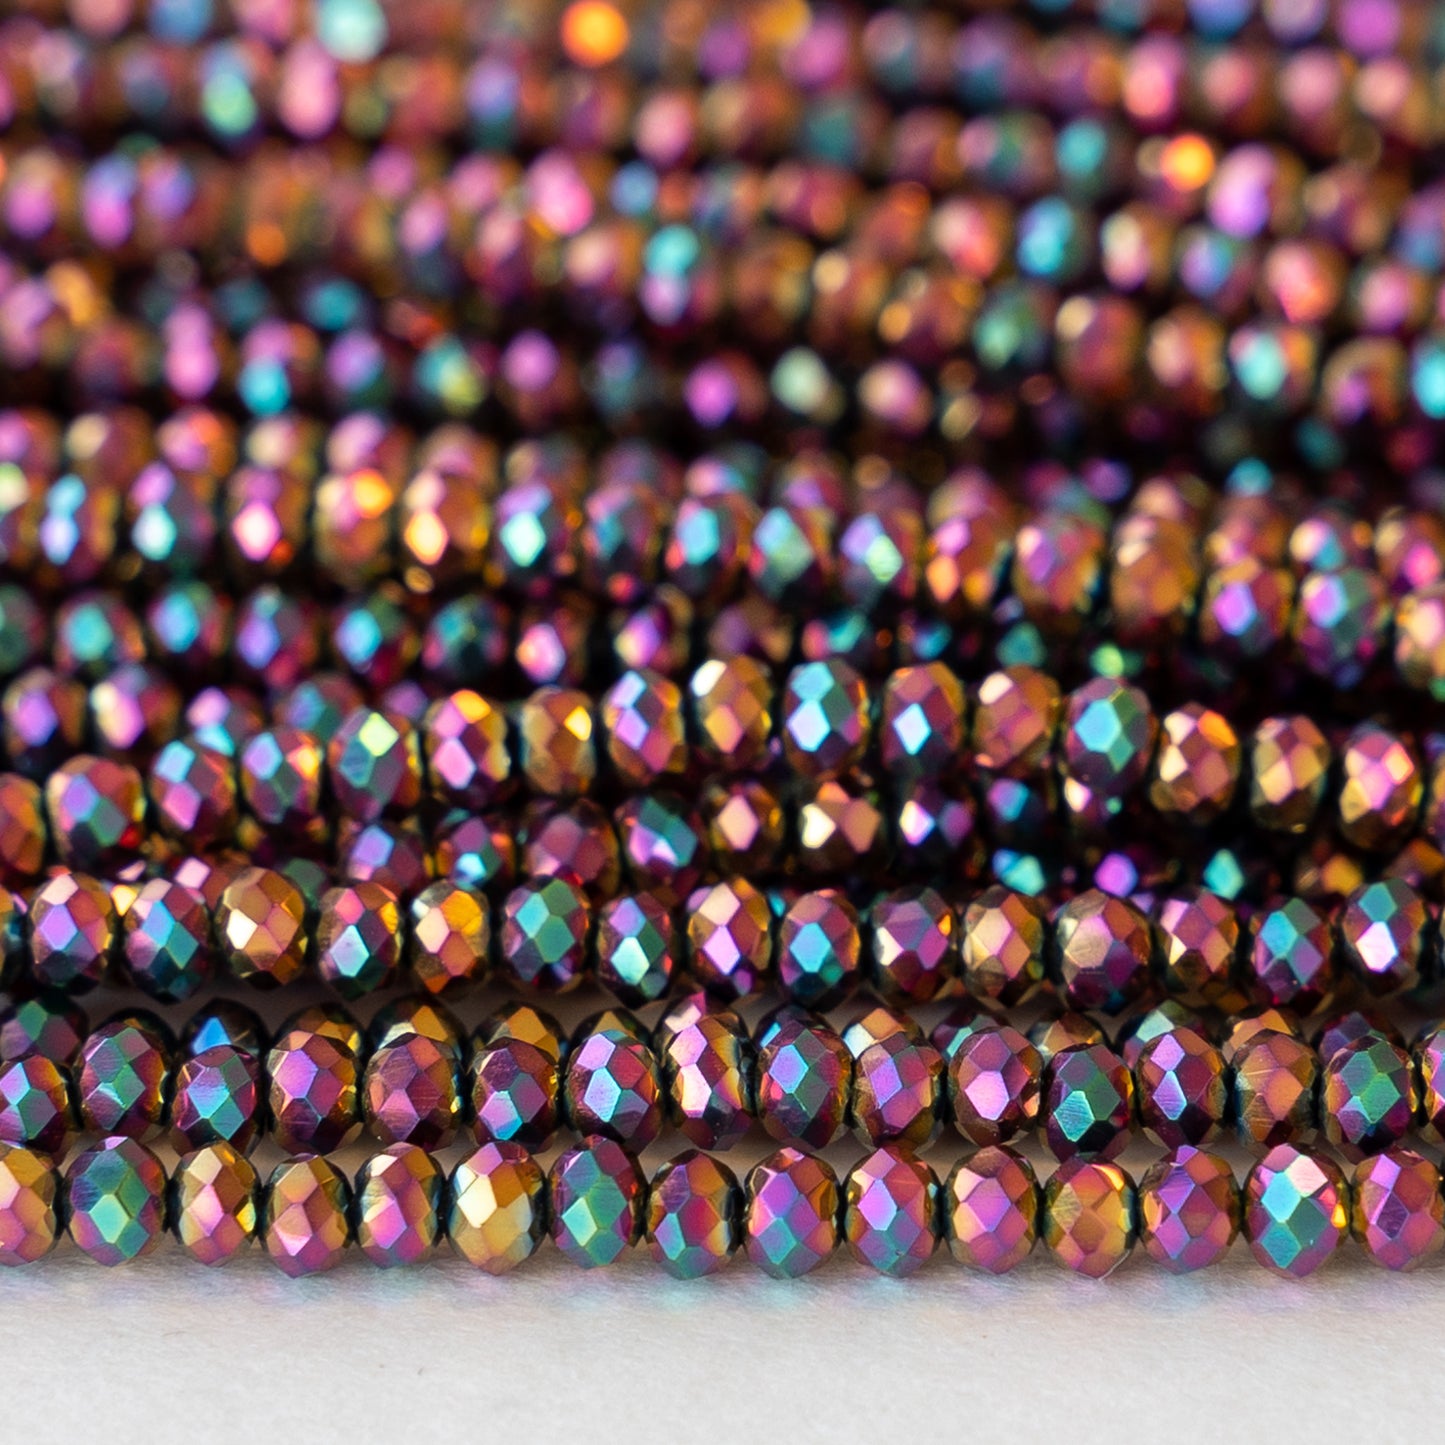 Efivs Arts 8500pcs Seed Beads 24 Colors 6/0 4mm Round Rainbow Beads for Bracelets Jewely Making, DIY Crafting